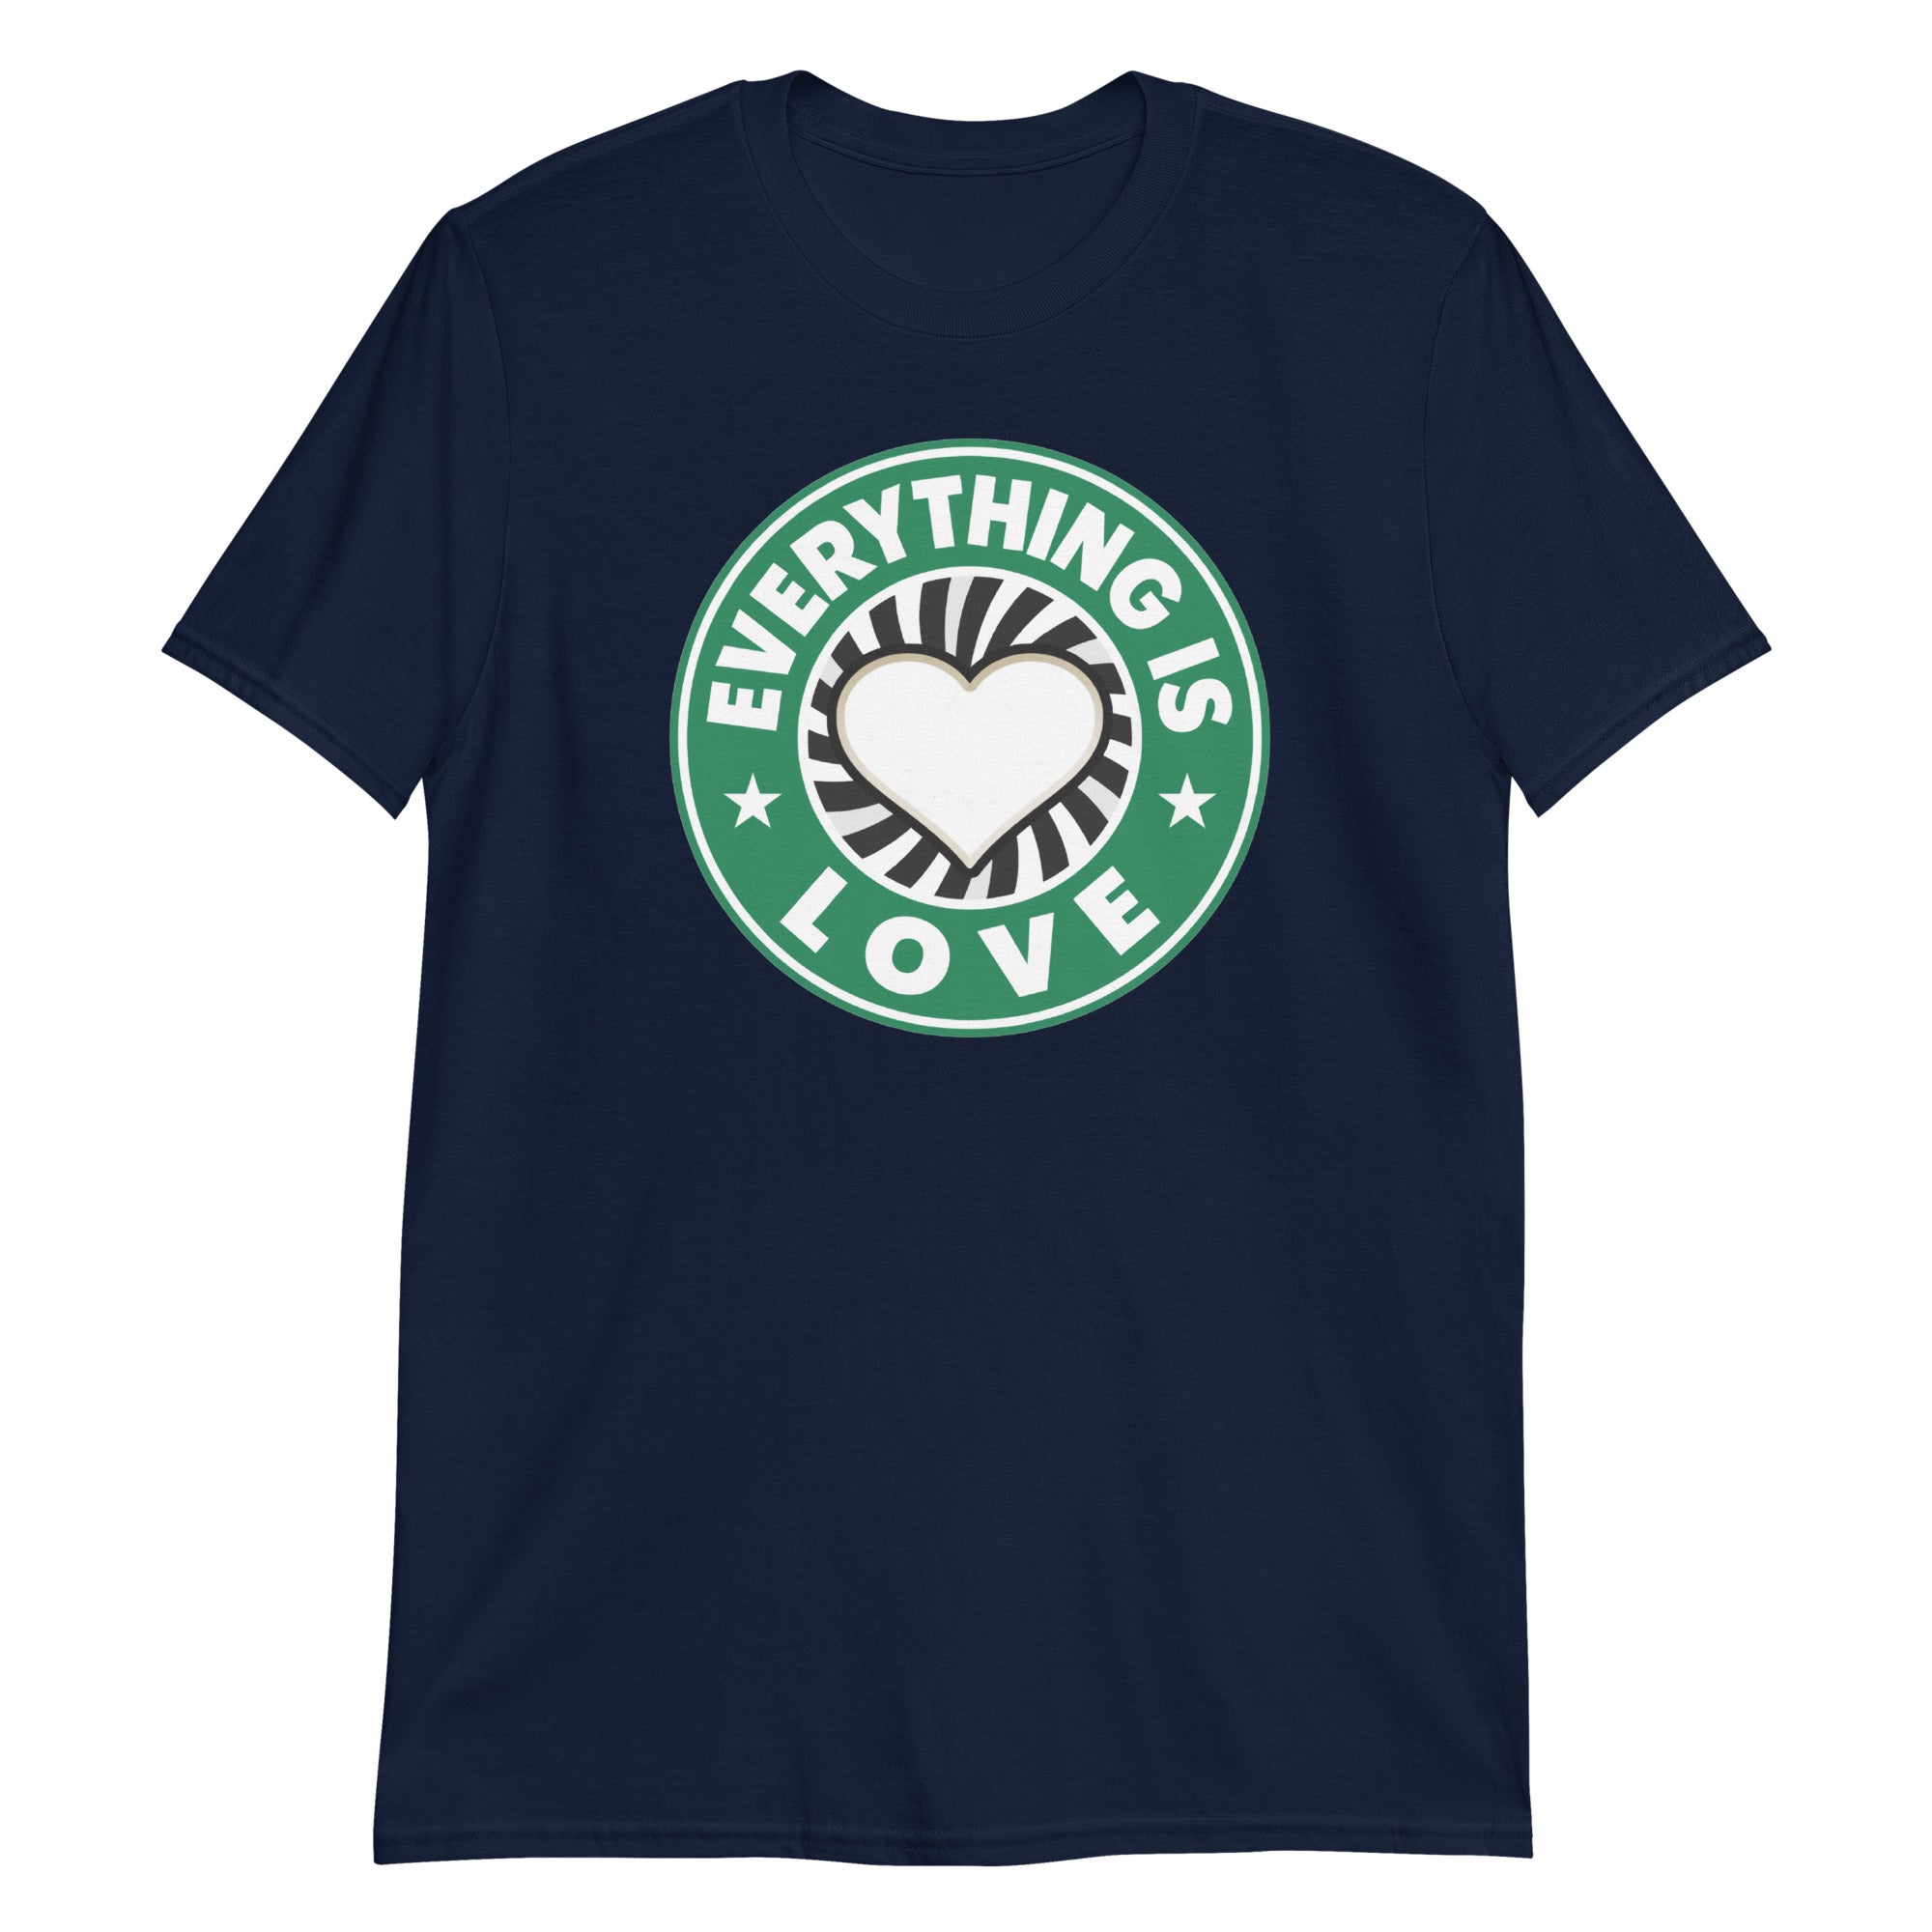 EVERYTHING IS LOVE - Unisex T-Shirt - Navy / S - Navy / M - Navy / L - Navy / XL - Navy / 2XL - Navy / 3XL